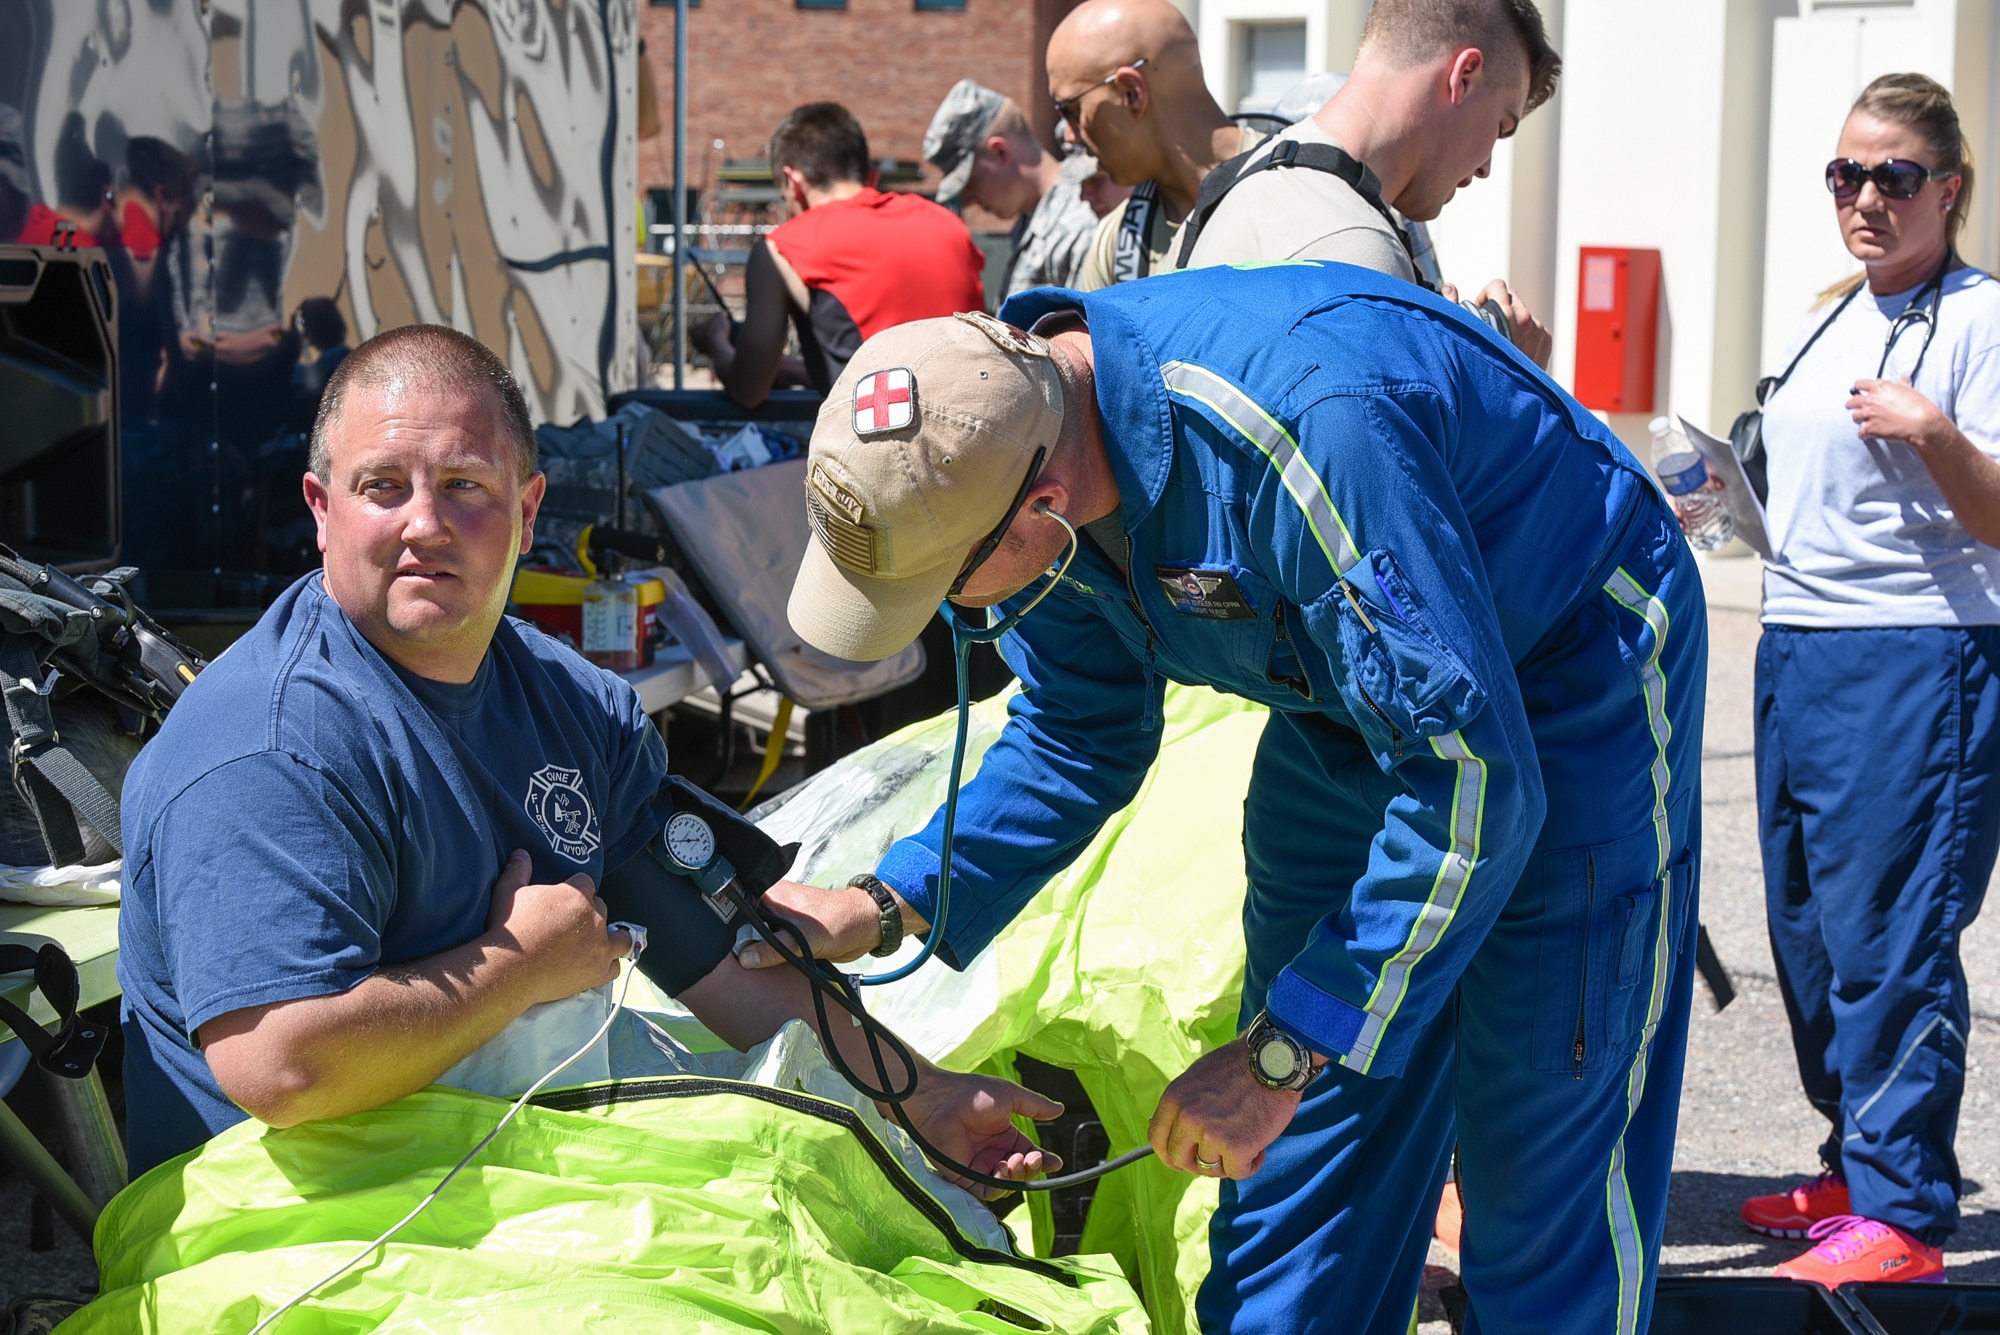 Casey Zeigler, AirLife Denver flight nurse, checks the vital signs of Region 7 Hazmat Engineer Brent Osborne, June 19, 2015, at Cheyenne Air National Guard Base in Cheyenne, Wyo. Civilian and military first responders are participating in Counter-CBRN All-Hazard Management Response (CAMR) training to practice chemical, biological, radiological, first response, medical, and incident command scenarios for possible threats in the region. (U.S. Air National Guard photo by Master Sgt. Charles Delano)